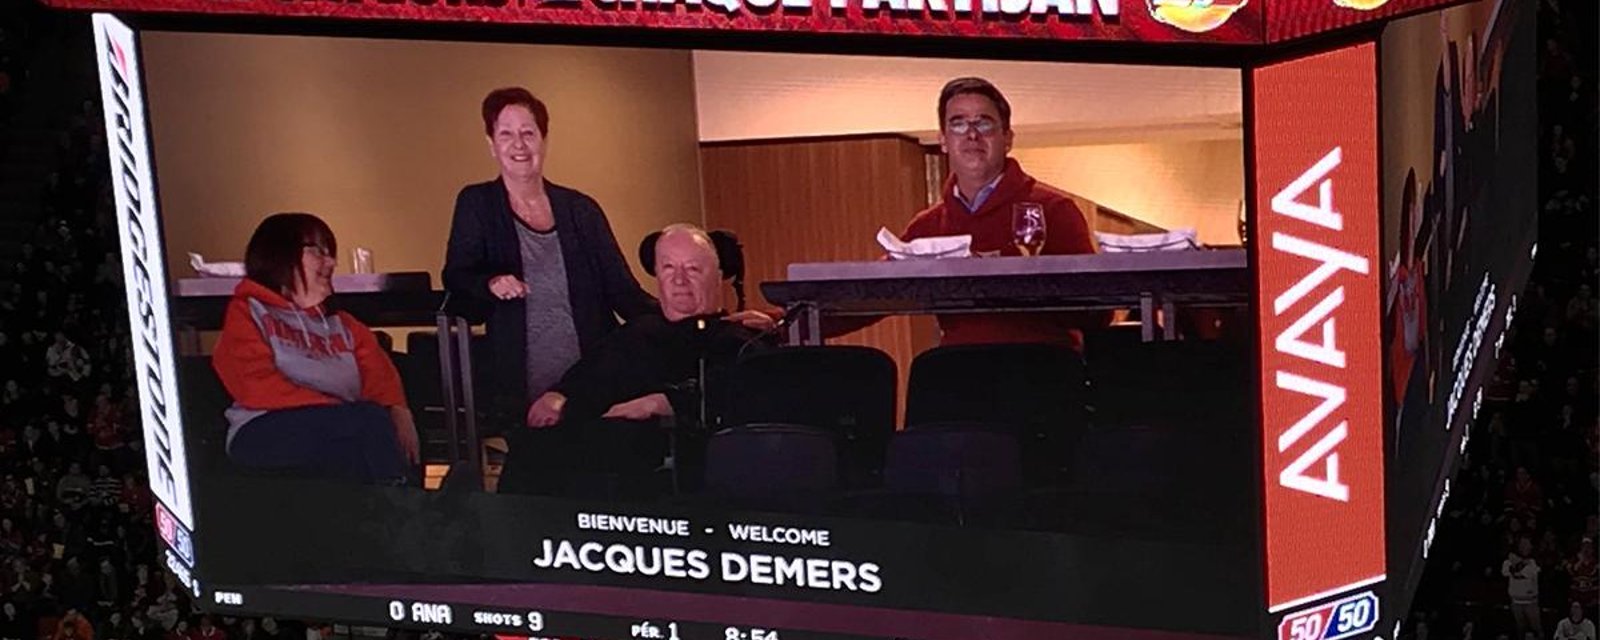 Jacques Demers made a surprise appearance at the Bell Center today